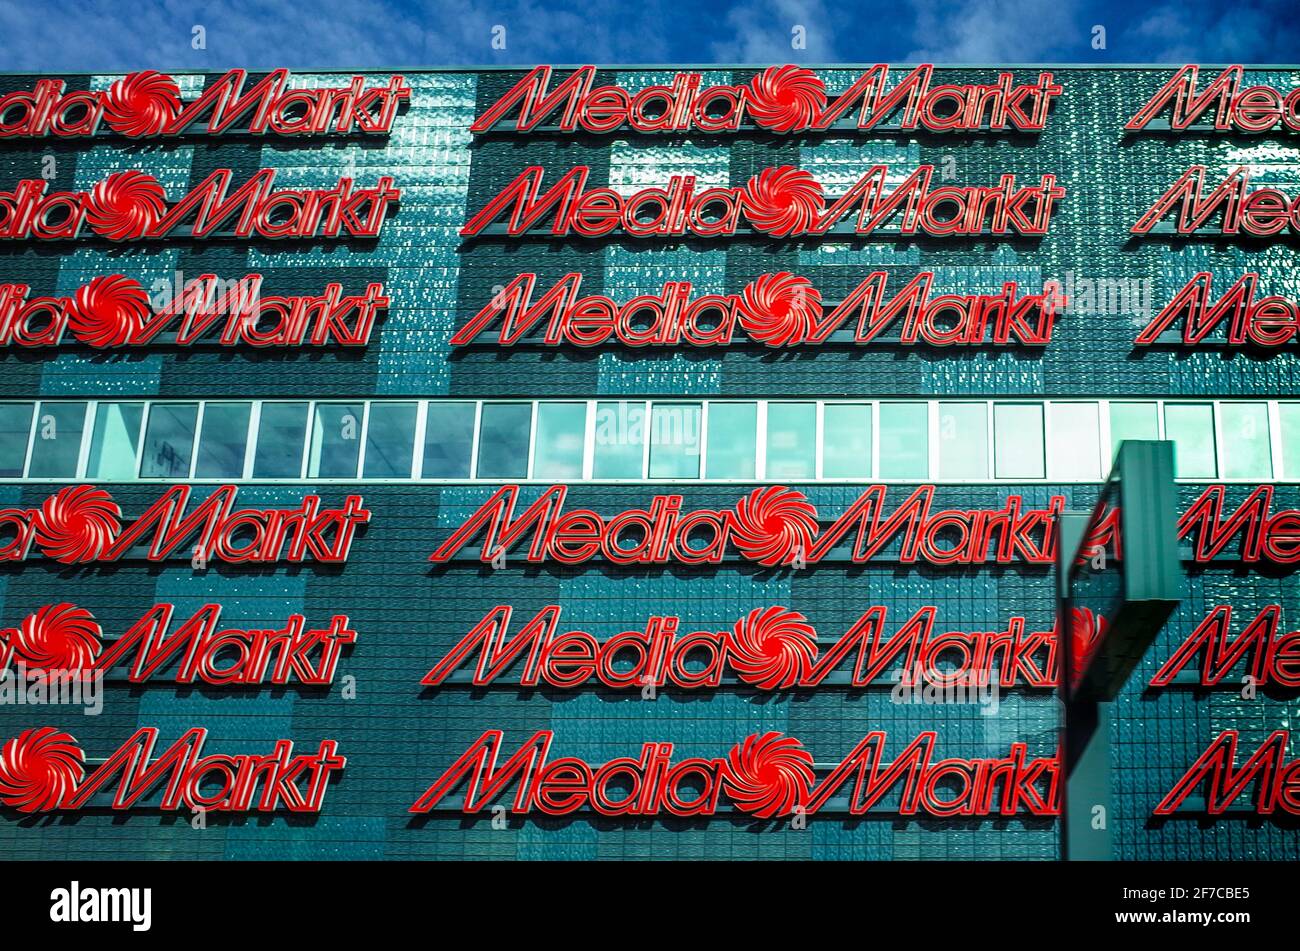 MediaMarkt - Media Markt storefront in Eindhoven NL - Media Markt is a German multinational chain of consumer electronics stores with over 1000 stores. Stock Photo